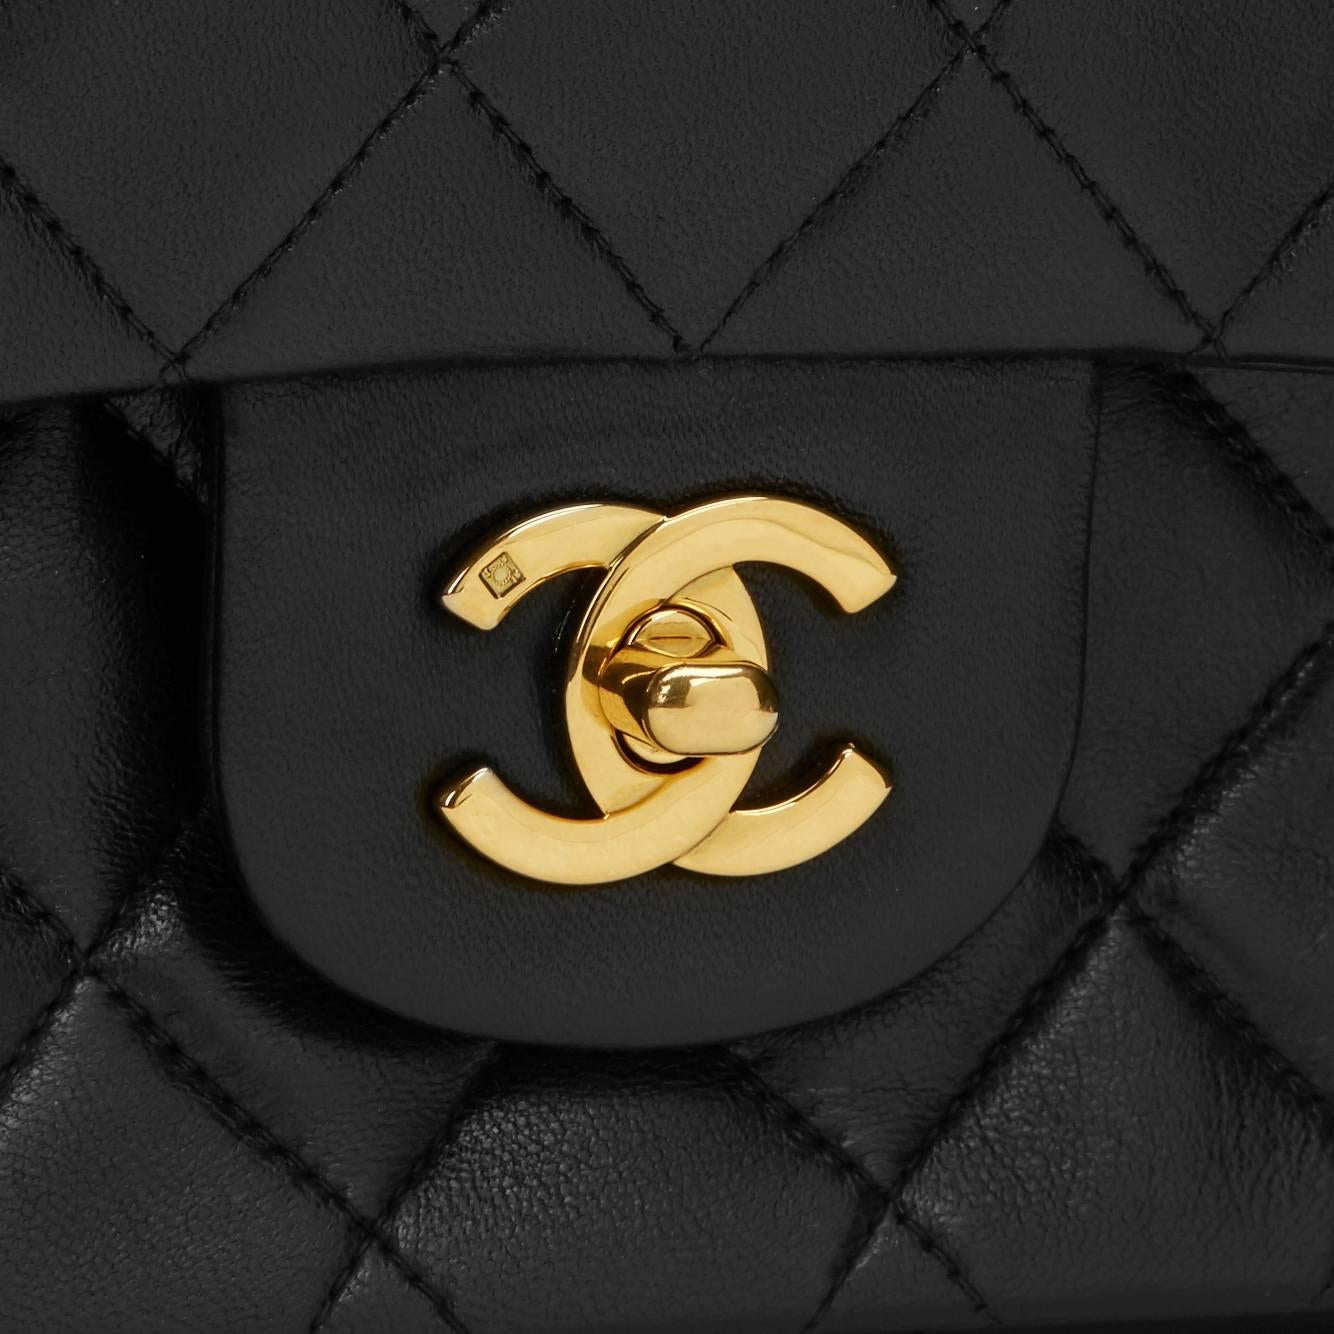 CHANEL
Black Quilted Lambskin Vintage Medium Classic Double Flap Bag

This CHANEL Medium Classic Double Flap Bag is in Excellent Pre-Owned Condition accompanied by Chanel Dust Bag, Box, Authenticity Card. Circa 1992. Primarily made from Lambskin